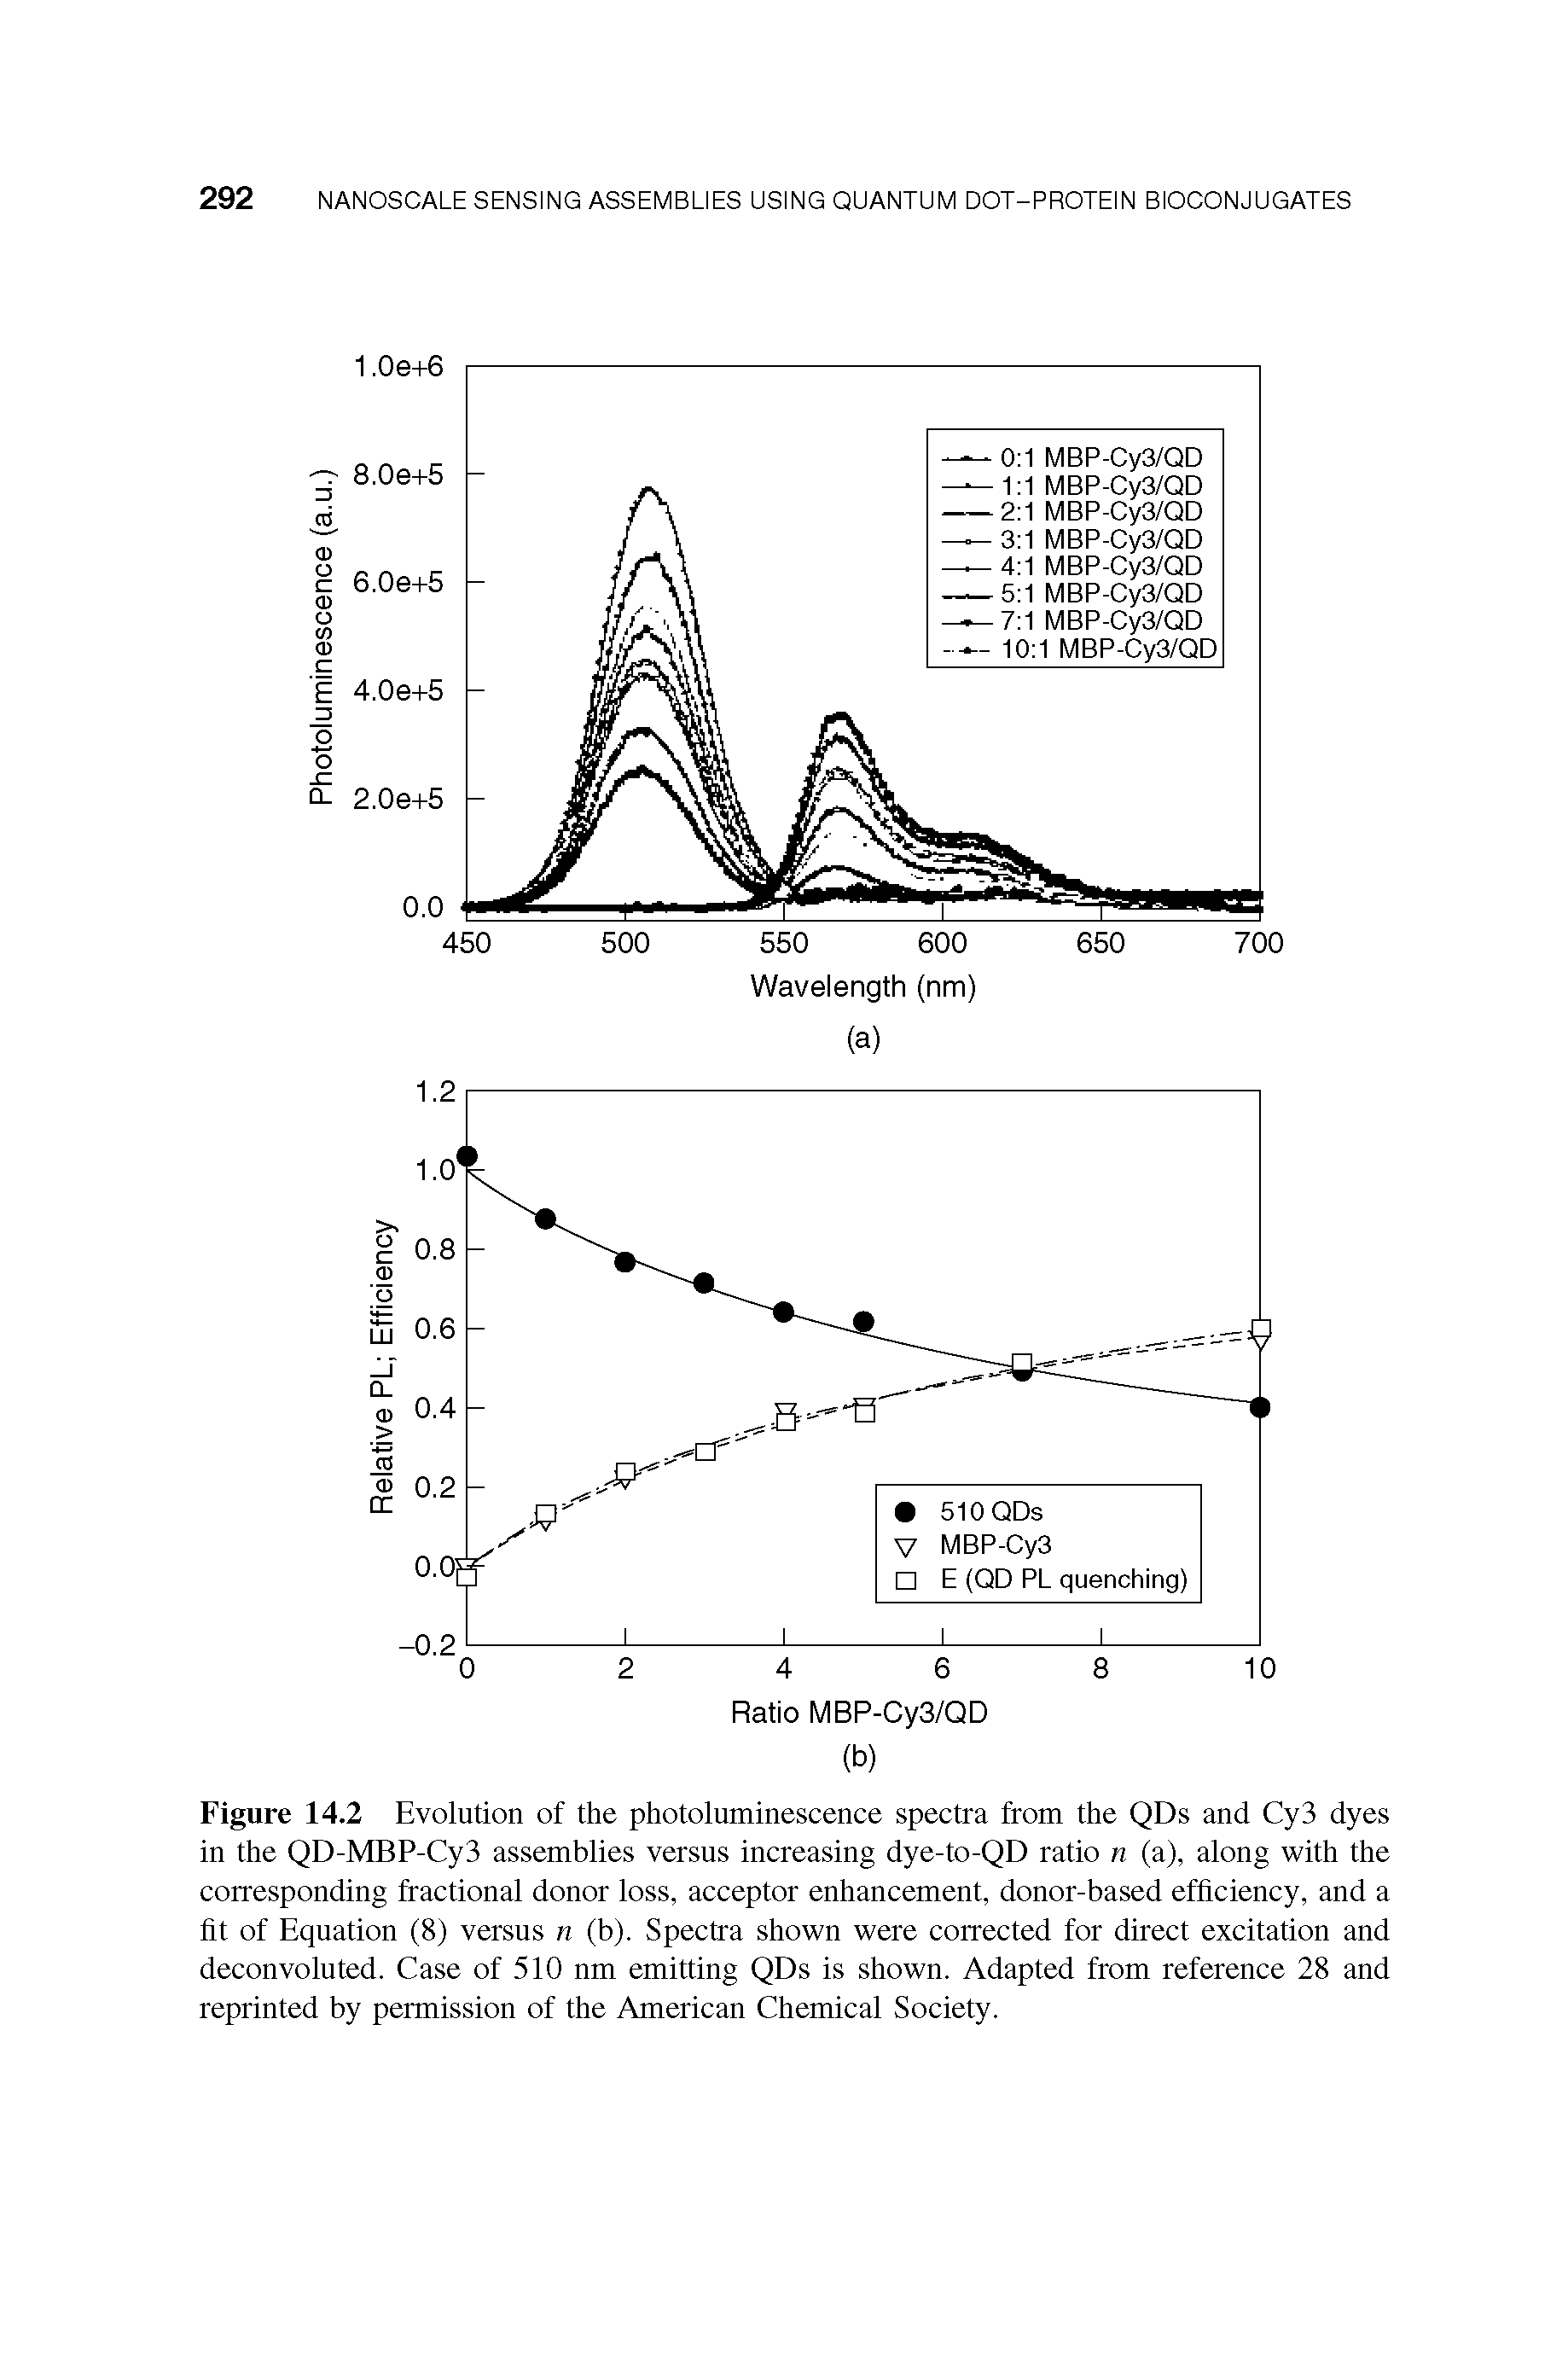 Figure 14.2 Evolution of the photoluminescence spectra from the QDs and Cy3 dyes in the QD-MBP-Cy3 assemblies versus increasing dye-to-QD ratio n (a), along with the corresponding fractional donor loss, acceptor enhancement, donor-based efficiency, and a fit of Equation (8) versus n (b). Spectra shown were corrected for direct excitation and deconvoluted. Case of 510 nm emitting QDs is shown. Adapted from reference 28 and reprinted by permission of the American Chemical Society.